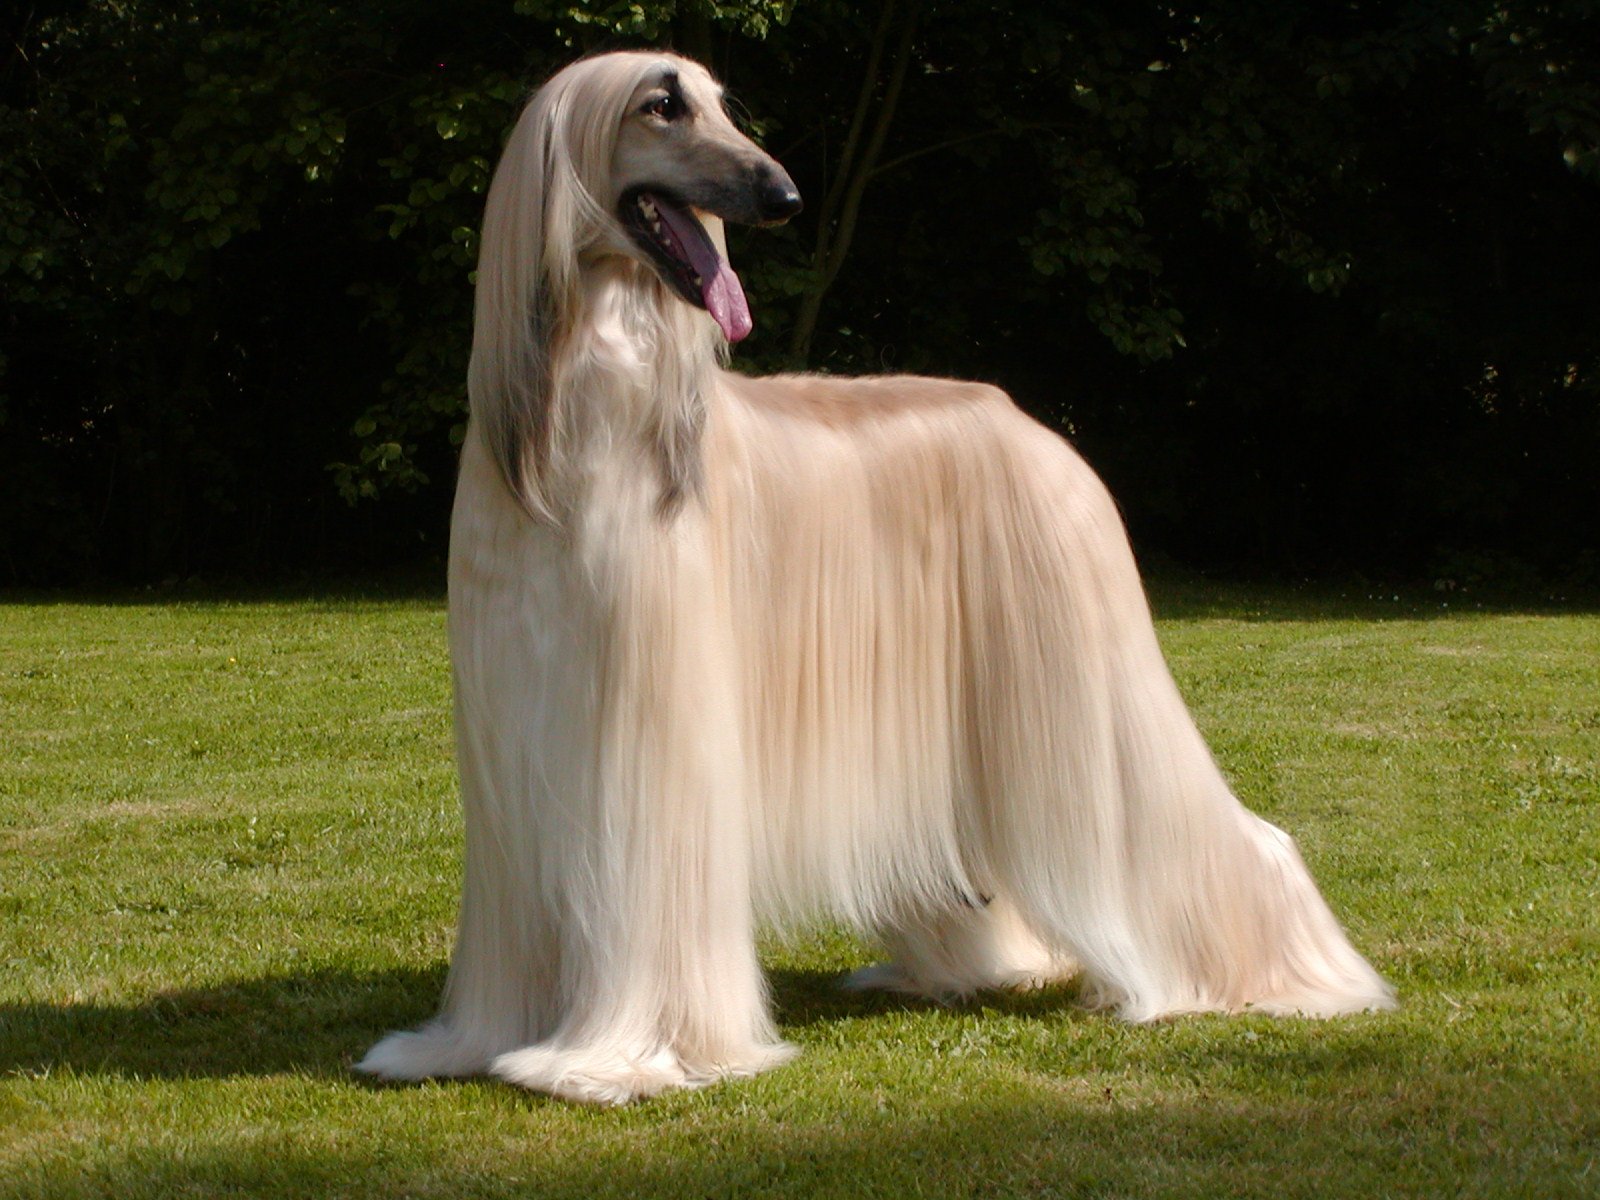 Afghan Hound - Pictures, Puppies, Facts, Behavior, Life Cycles